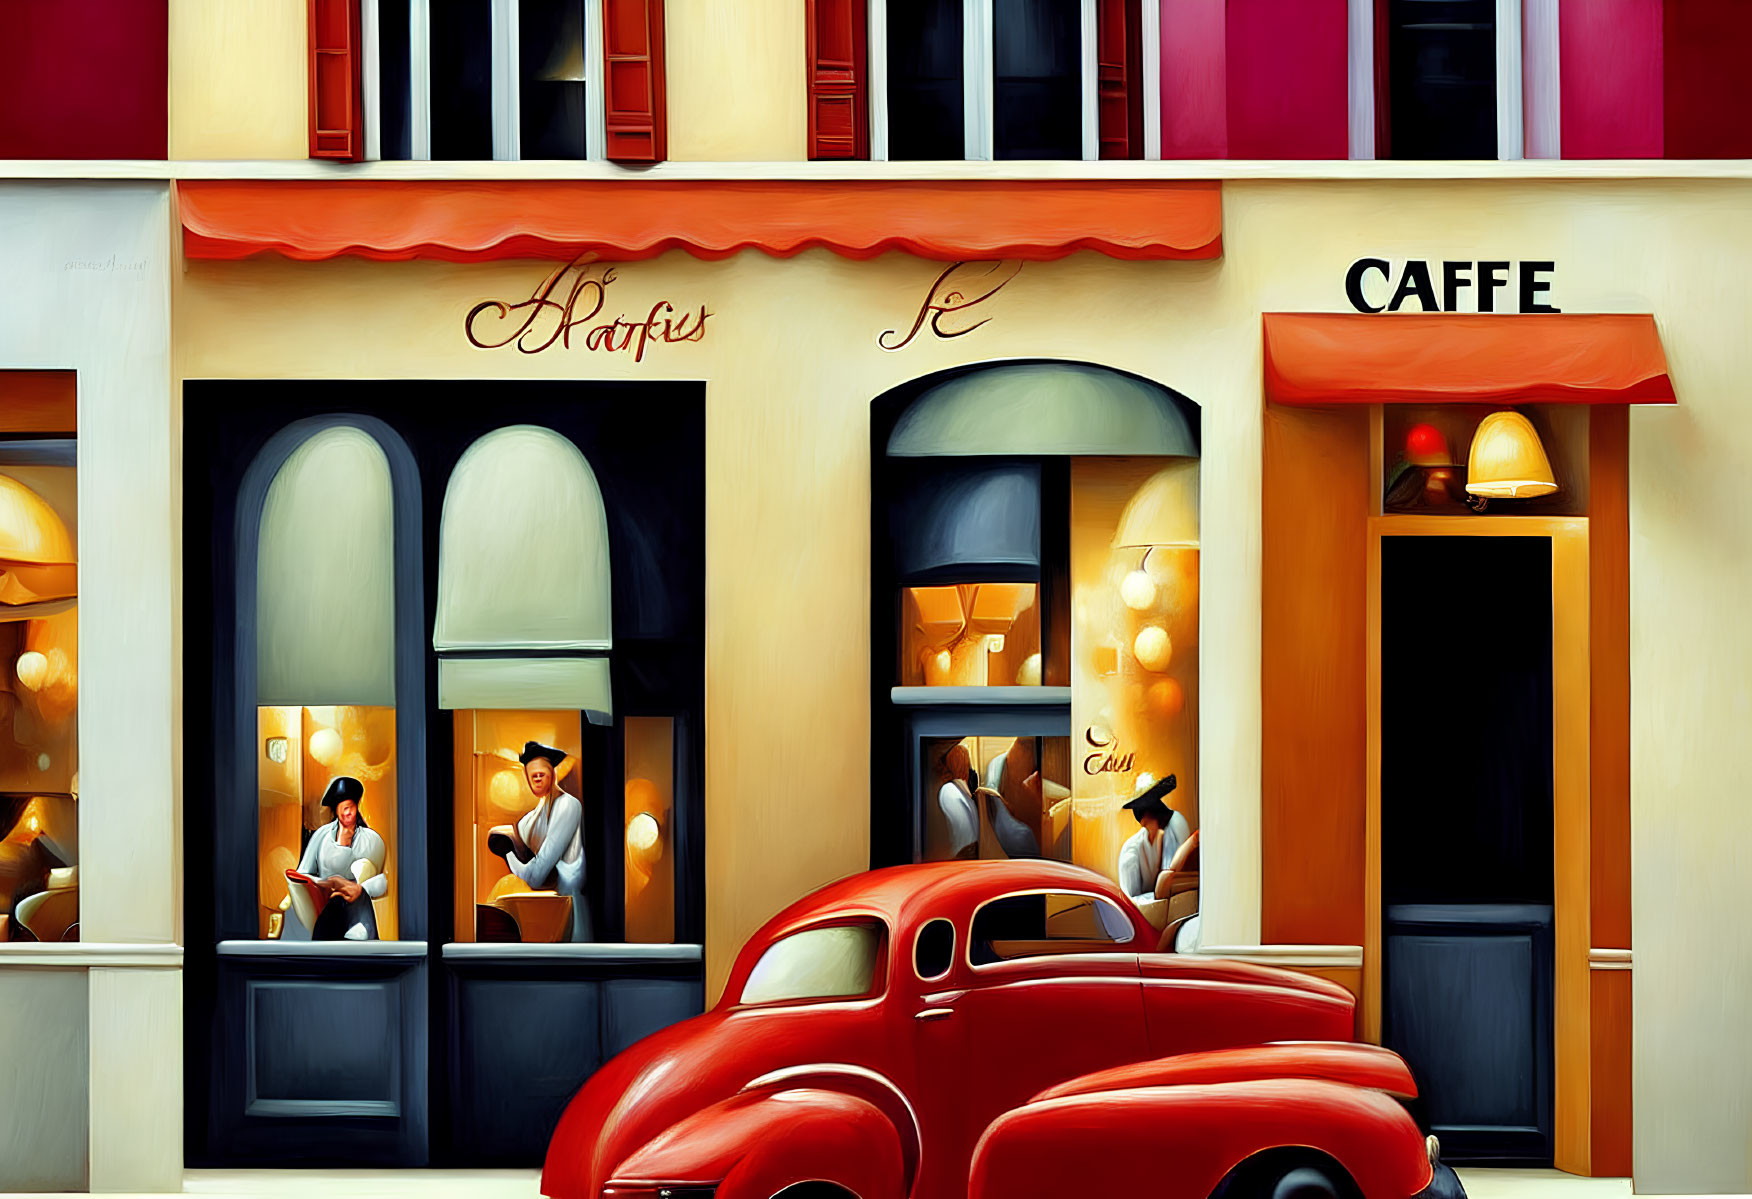 Vibrant street scene with red car outside cafe and people inside.